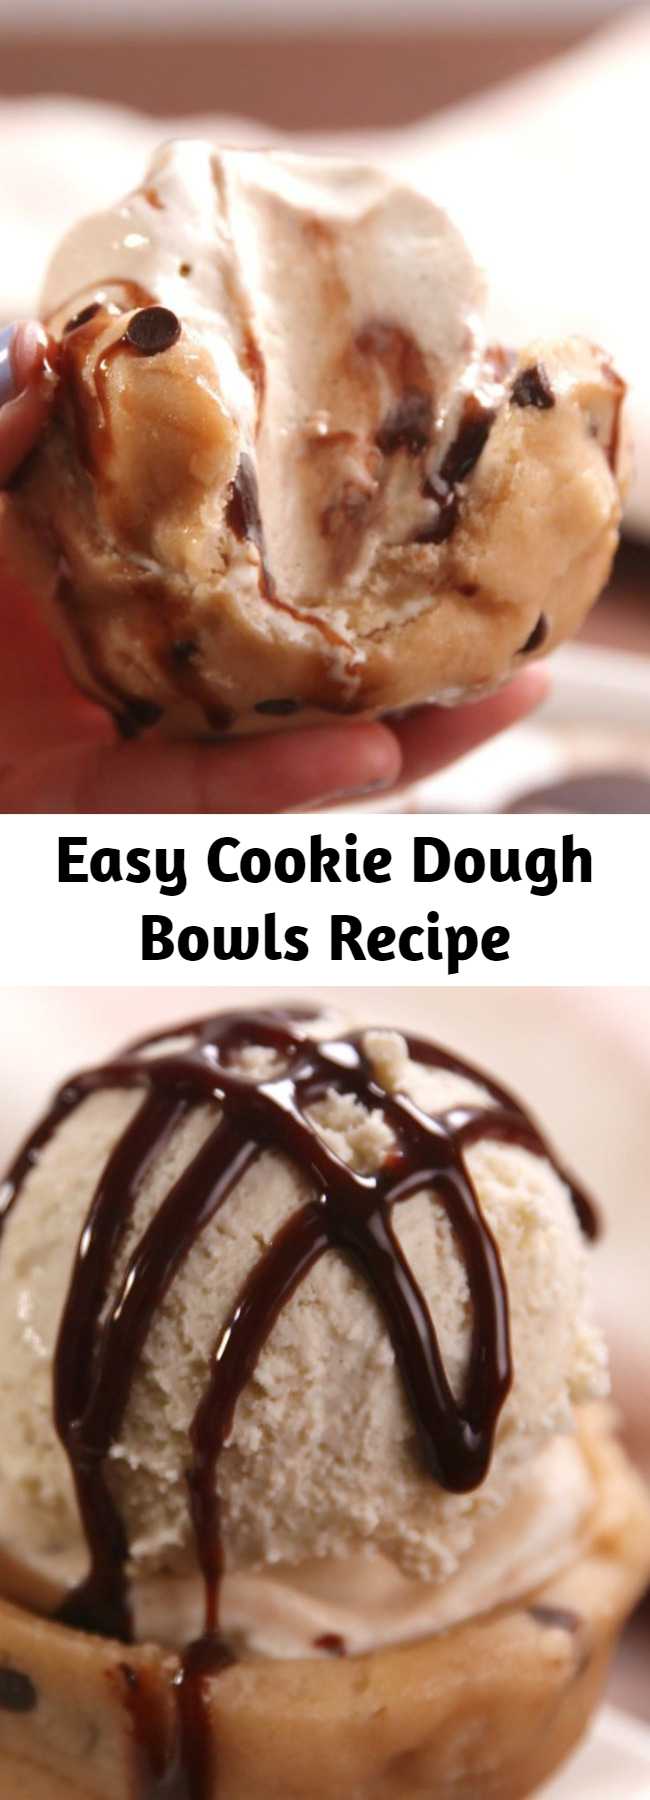 Easy Cookie Dough Bowls Recipe - These cookie dough bowls are the perfect vessel for all things sweet. All bowls should be edible bowls. #easy #recipe #edible #cookiedough #cookie #bowls #icecream #birthdaypartyideas #summer #partyideas #chocolate #chocolatechip #sauce